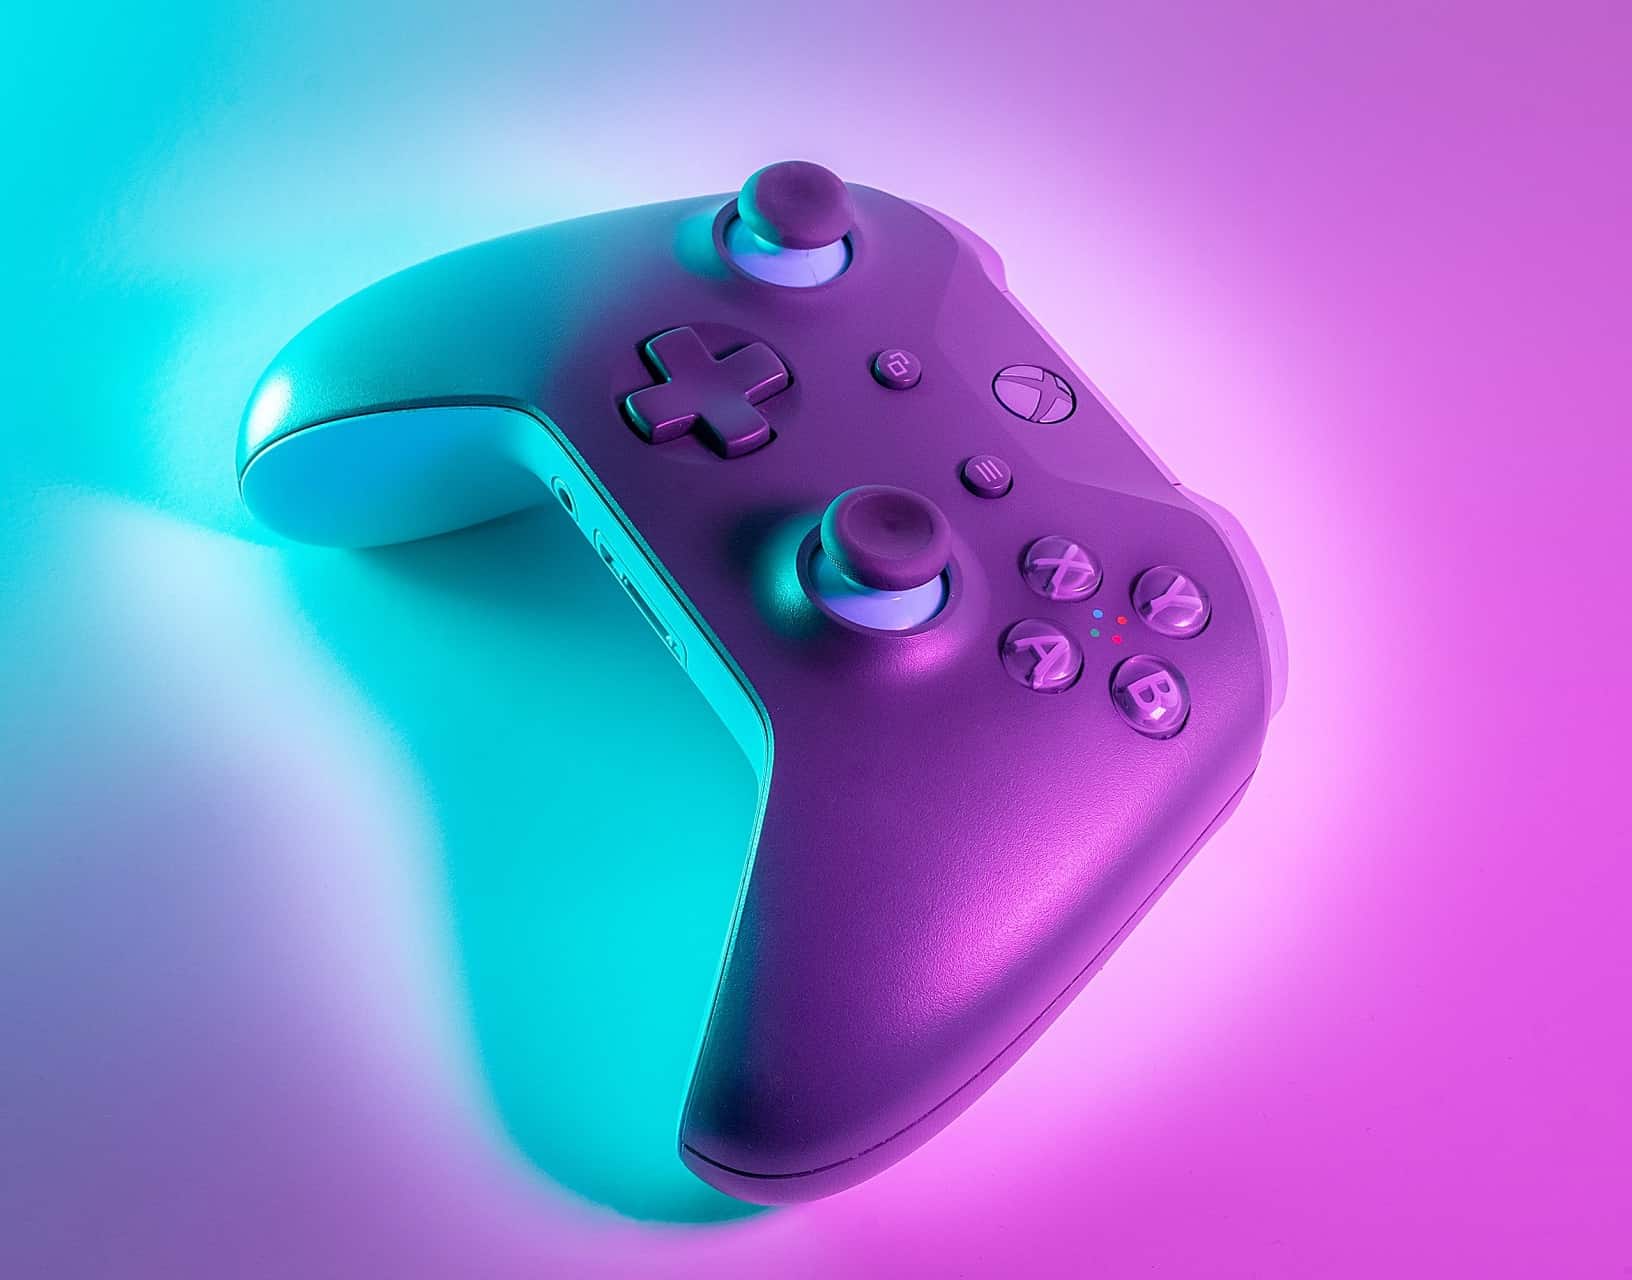 Hot Pink and Cyan colored Xbox controller laying down